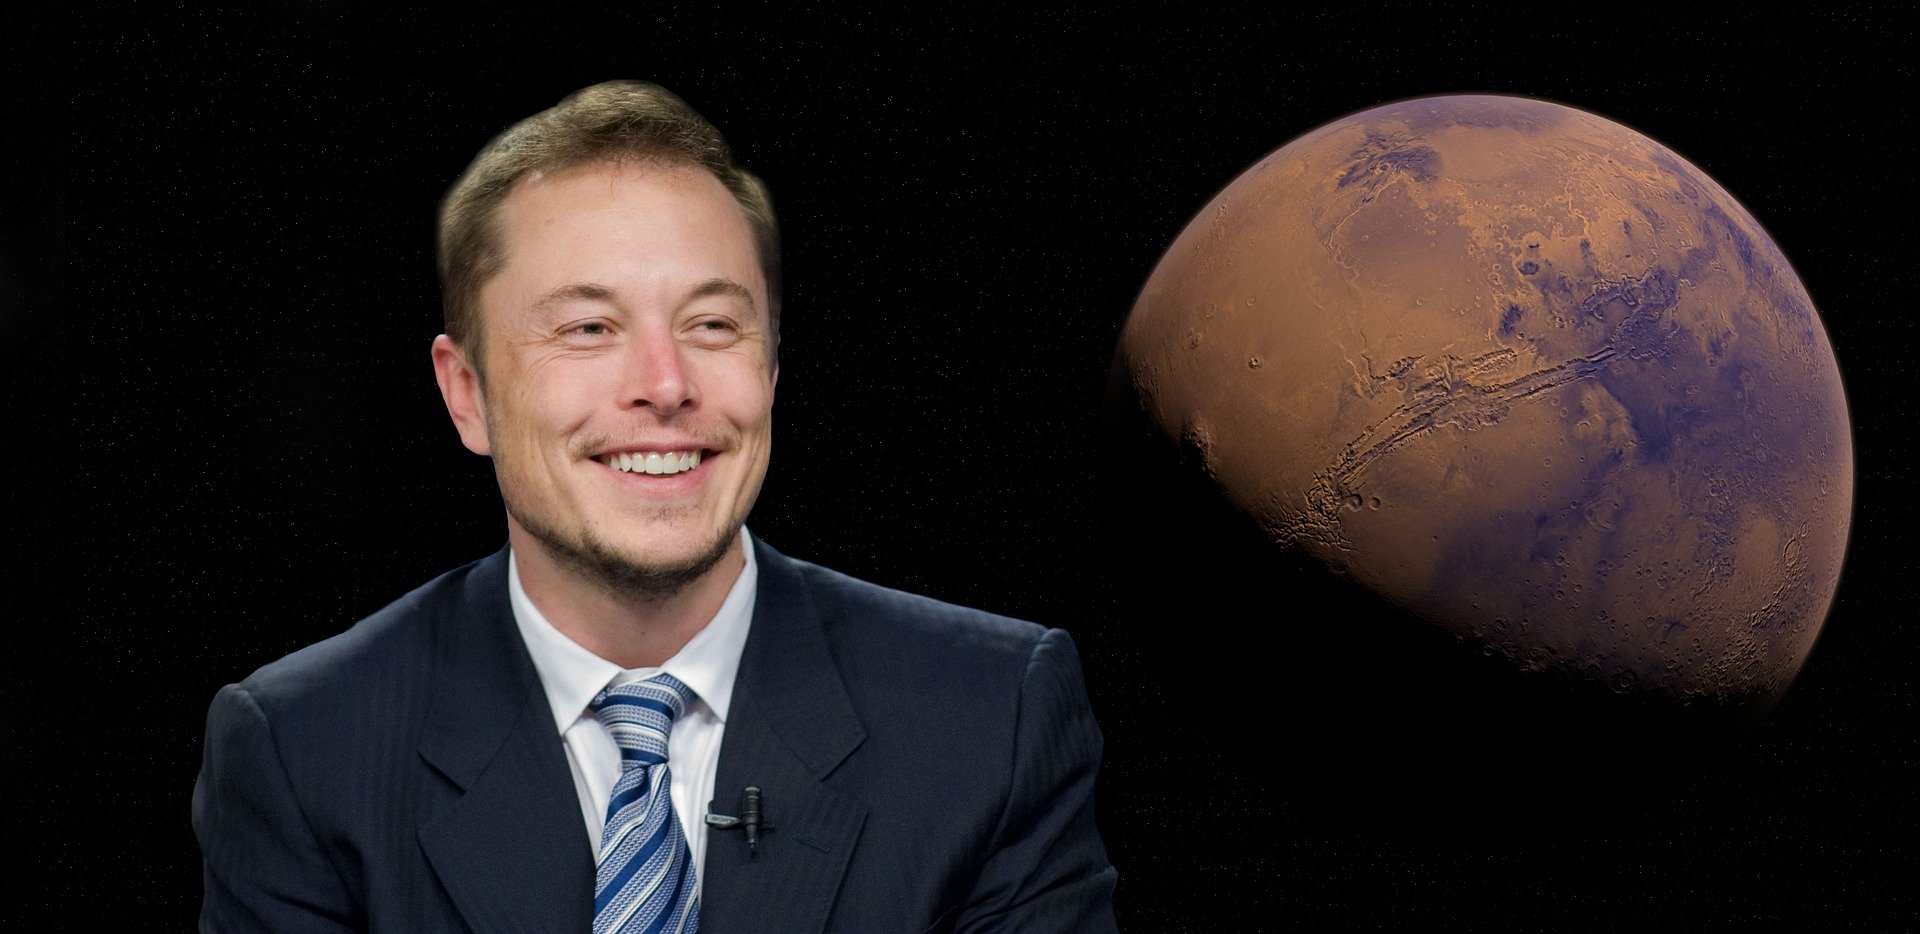 Interesting Facts About Elon Musk You Should Know